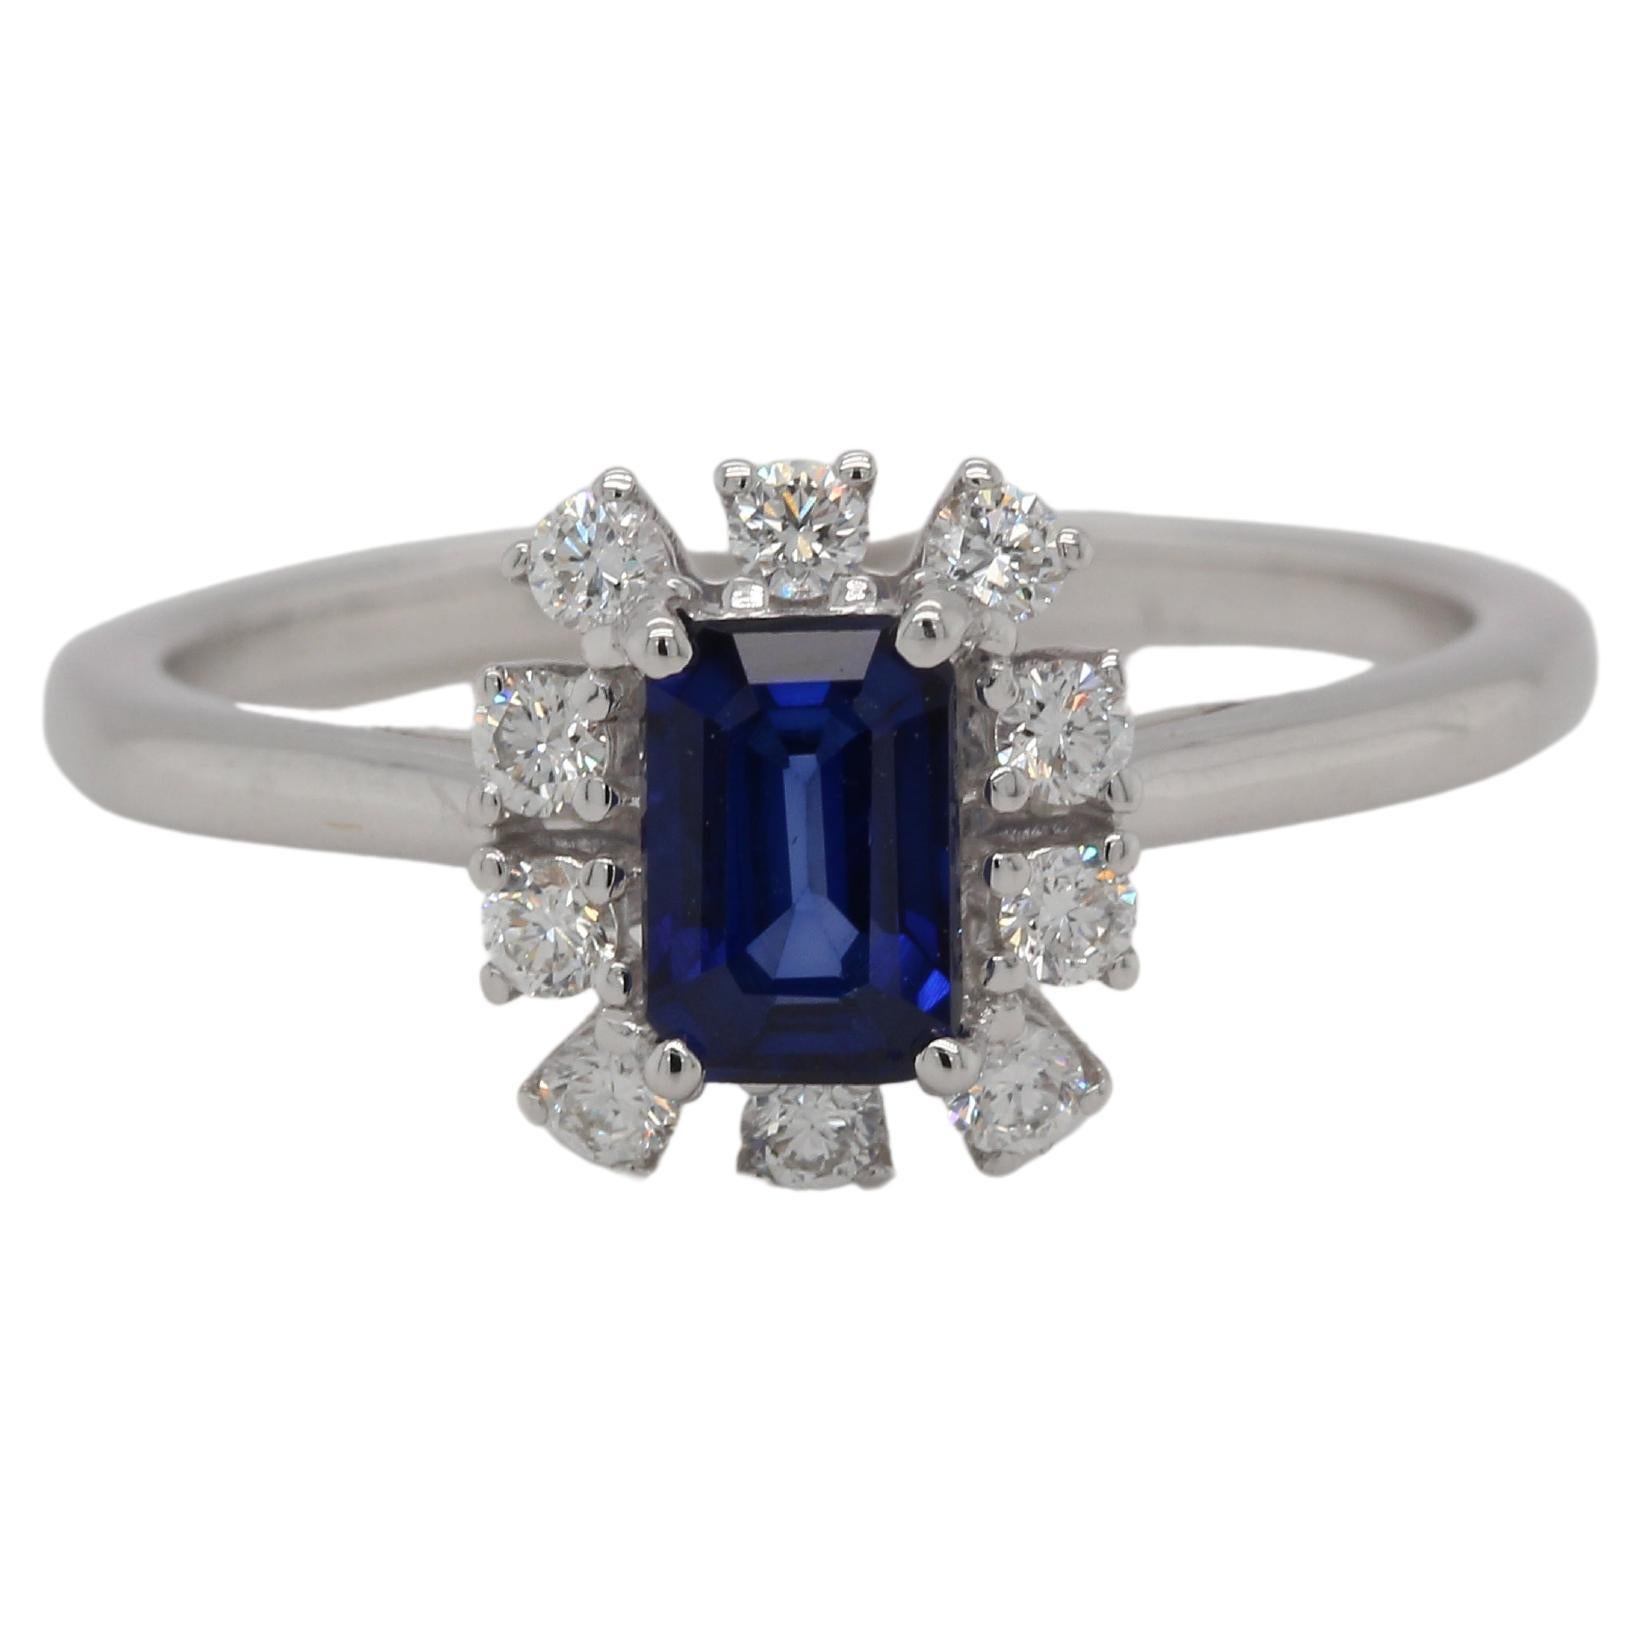 This ring is ideal for those who wish to make a statement with their jewelry. The color of the brilliant diffusion blue sapphire stone, as well as the diamond stones surrounding it, makes it stand out. This ring's antique-style setting is stunning,